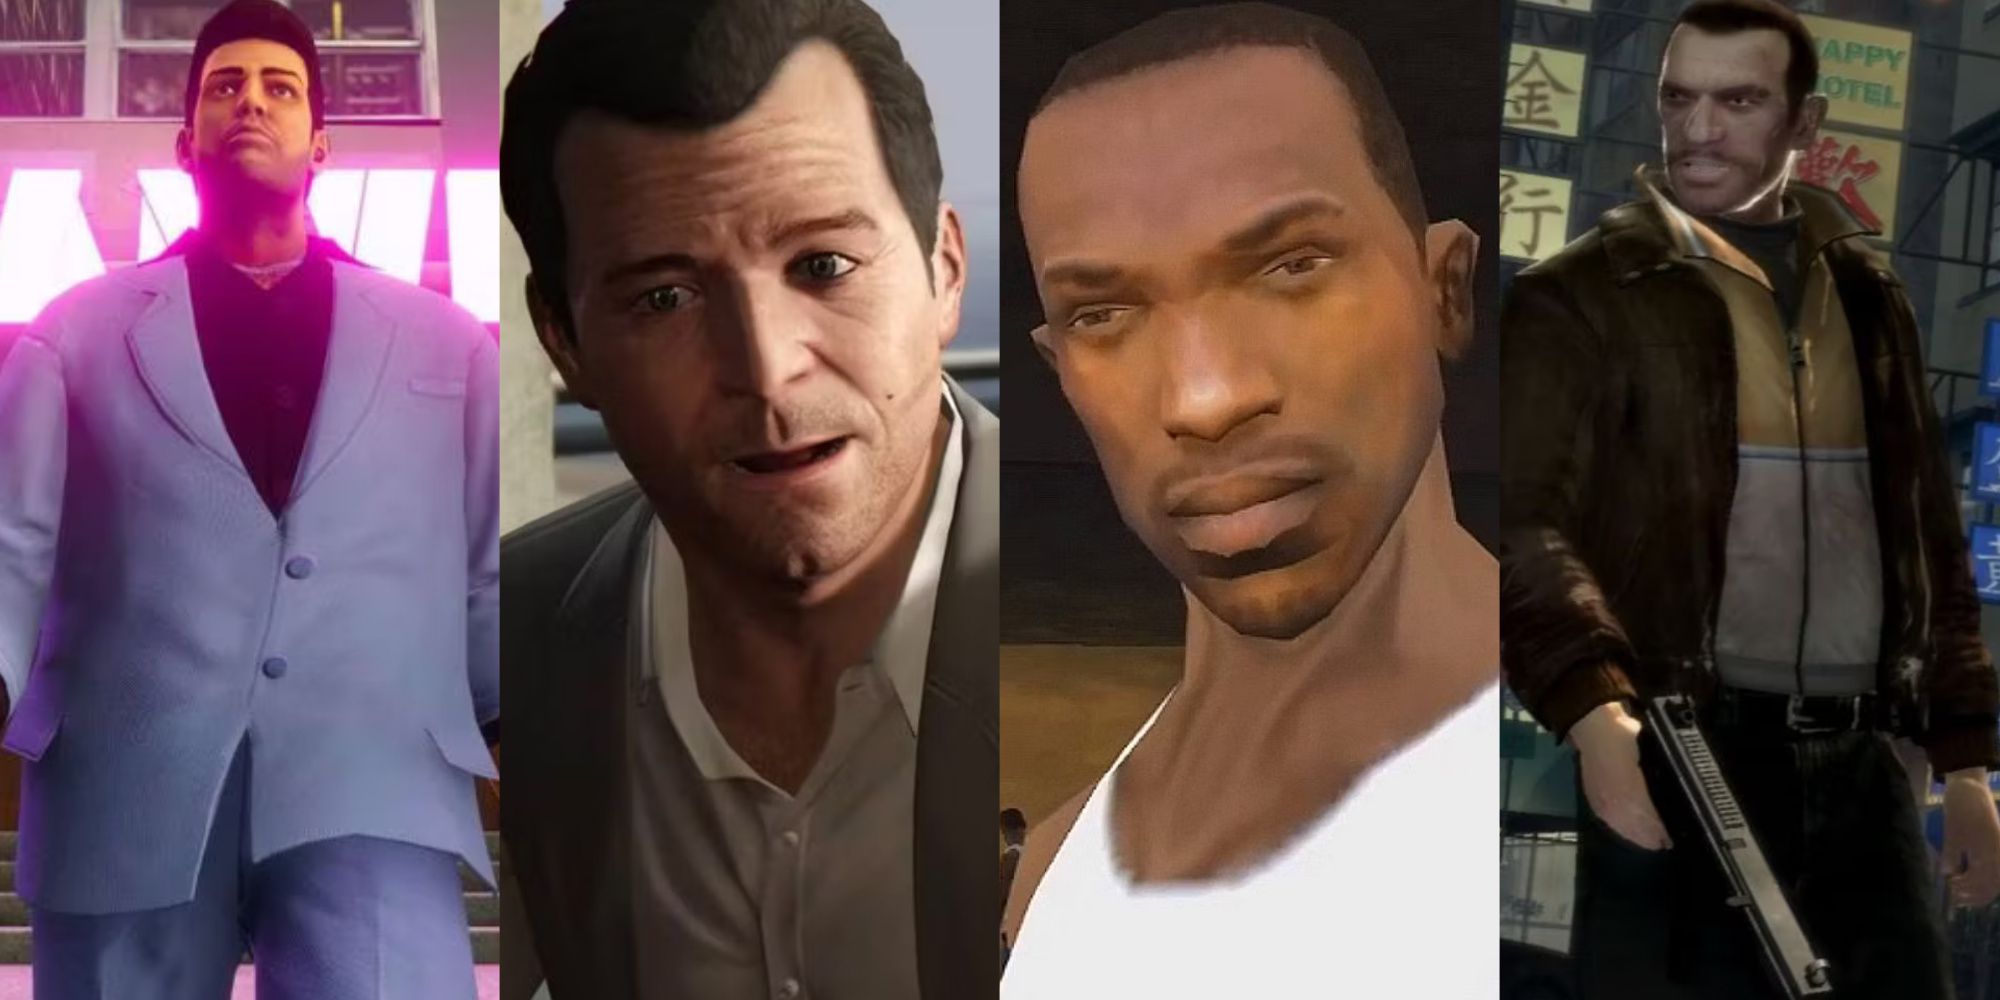 A collage showing the protagonists of GTA Vice City, 5, San Andreas, and 4.